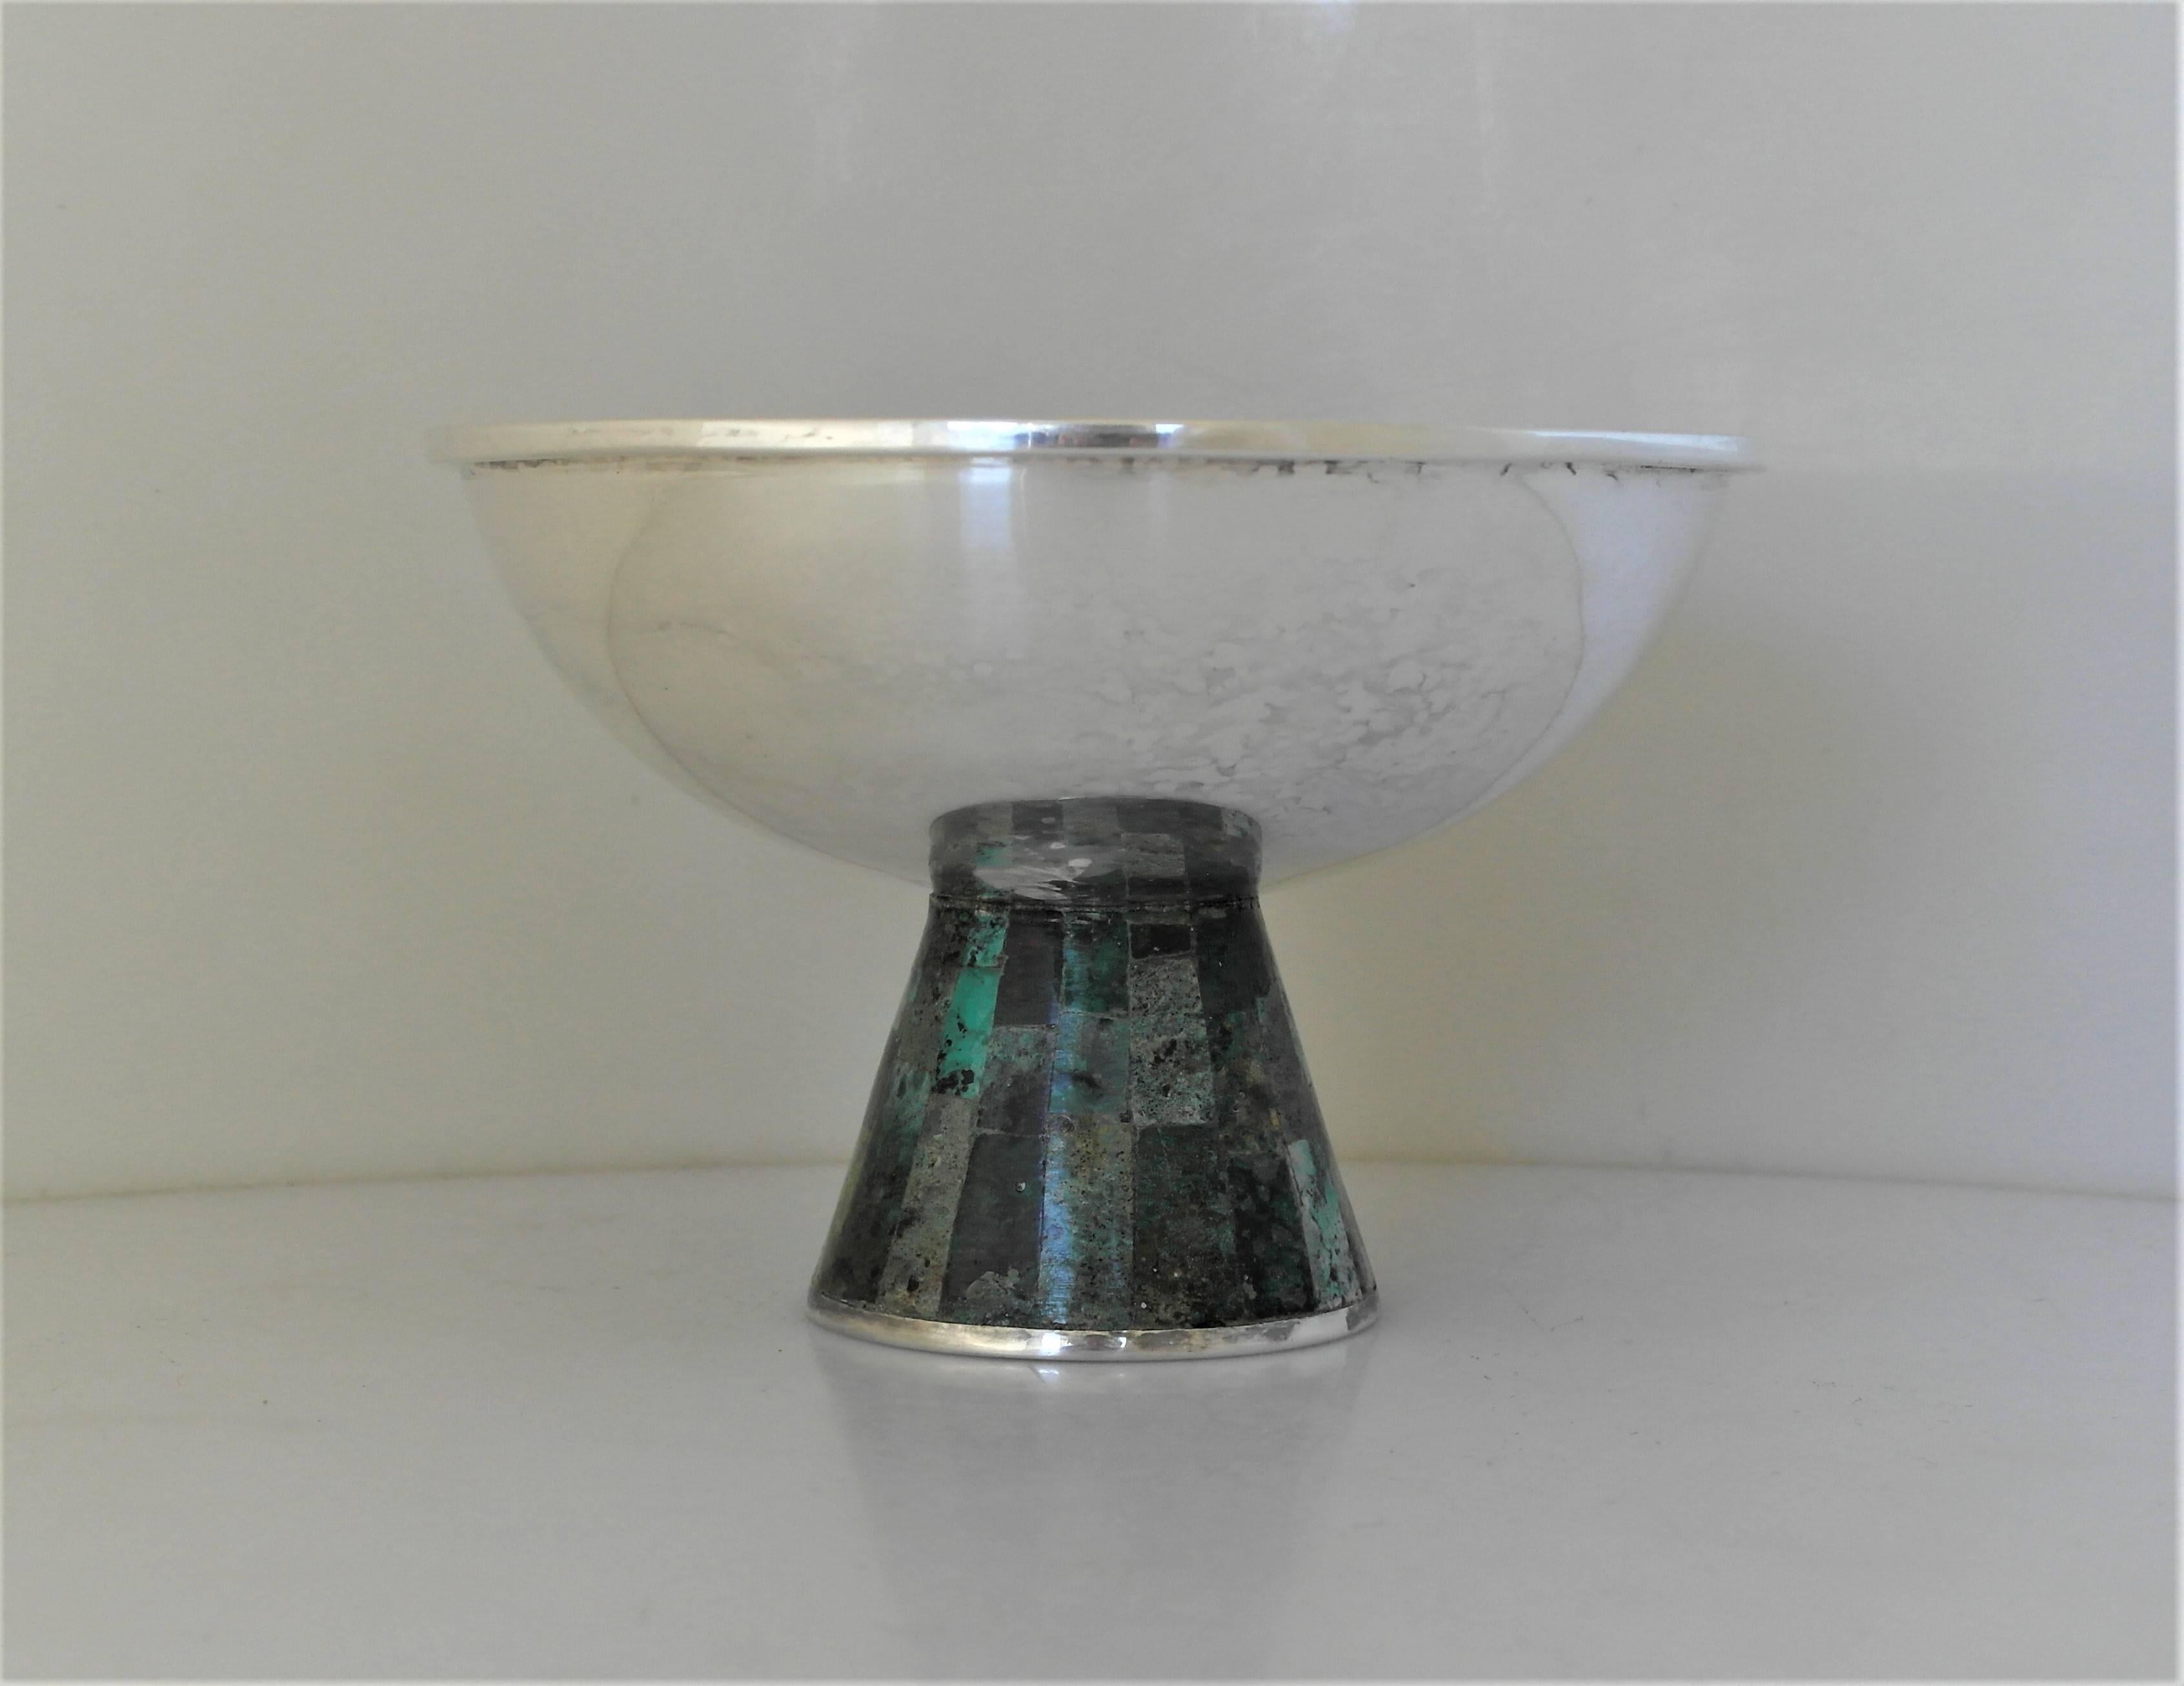 Being offered is a superb circa 1955 silver plate and azur malachite pedestal bowl made by Los Castillo of Taxco, Mexico.  Handmade raised bowl features a pedestal base with azur malachite stone inlay. Dimensions: 4 1/2" height x 5"